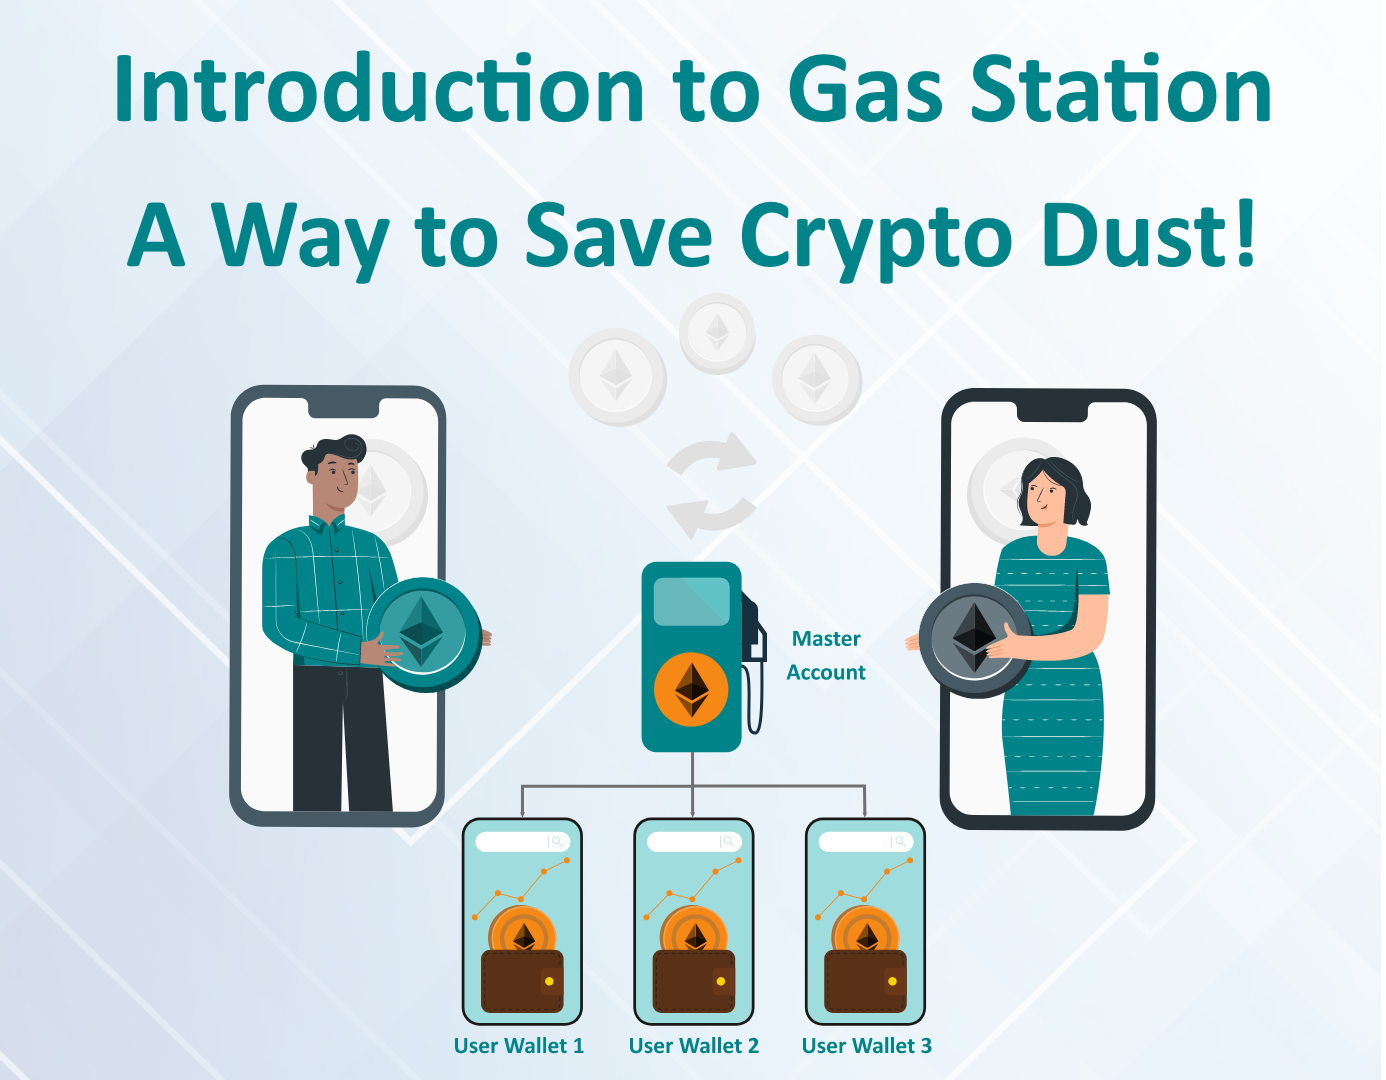 Visual representation of a gas station concept that symbolizes efficient crypto transaction management and reduction of crypto dust.